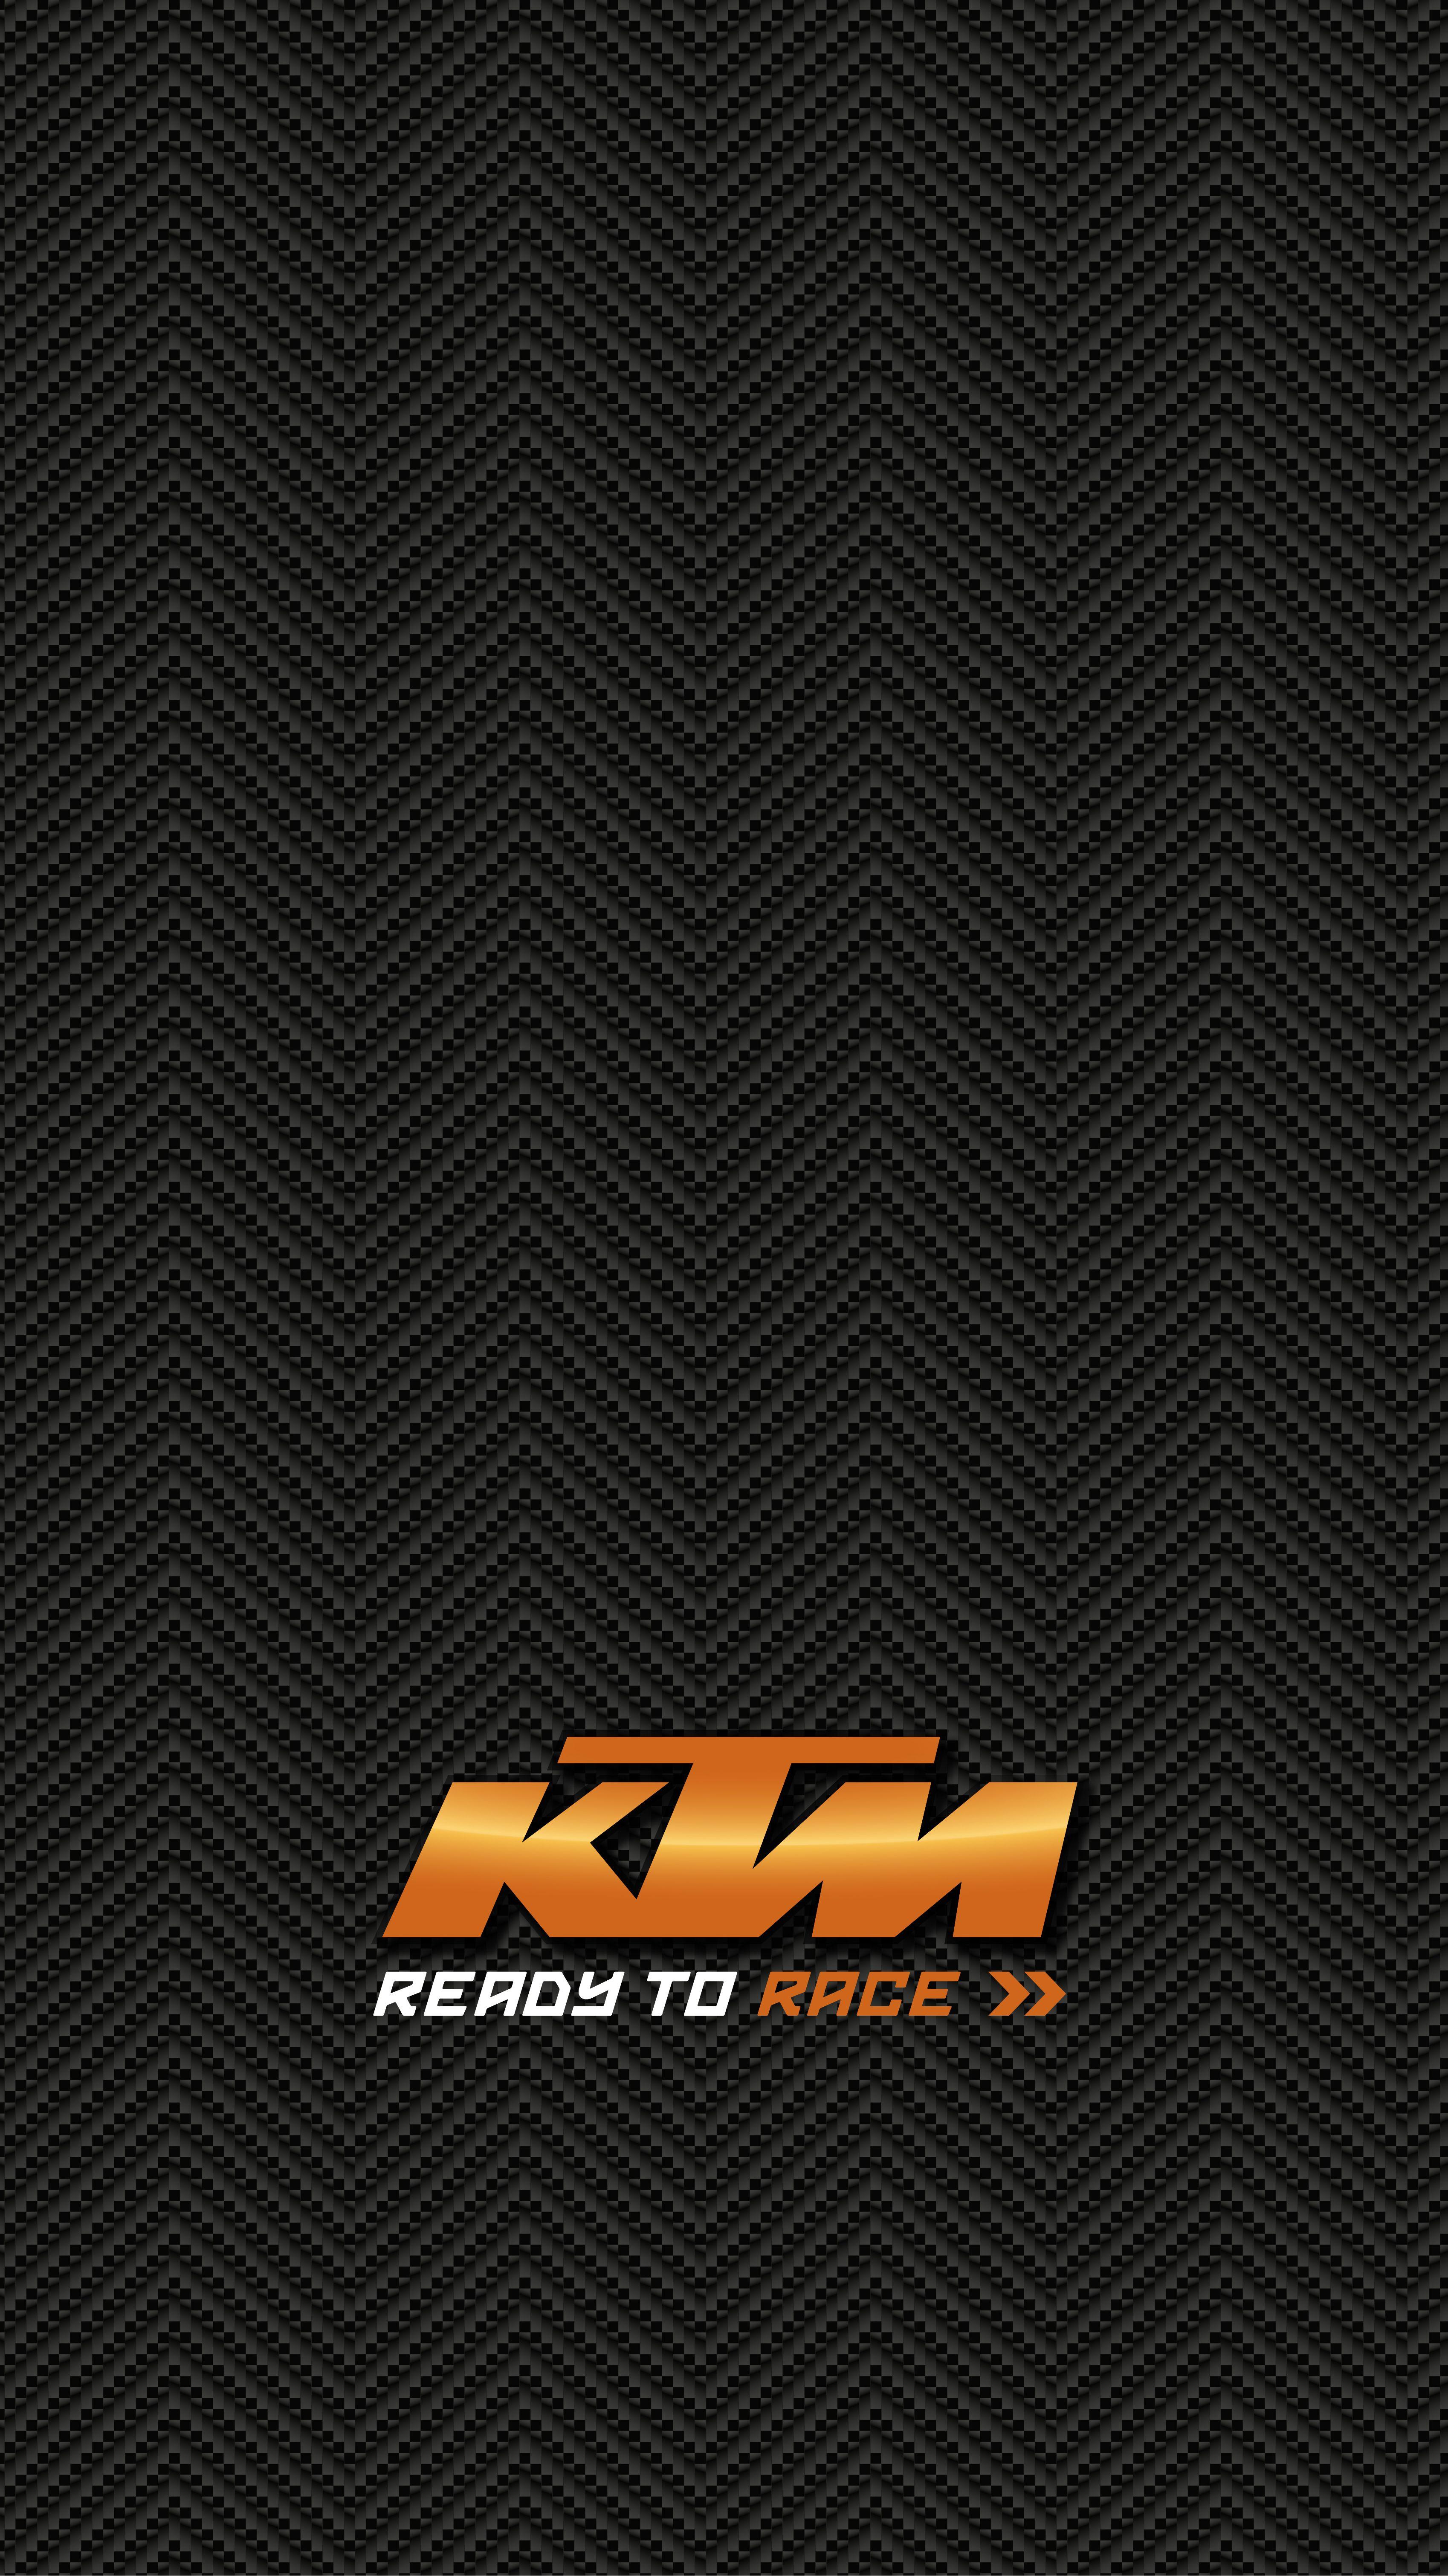 Ktm Iphone Wallpapers Top Free Ktm Iphone Backgrounds Wallpaperaccess